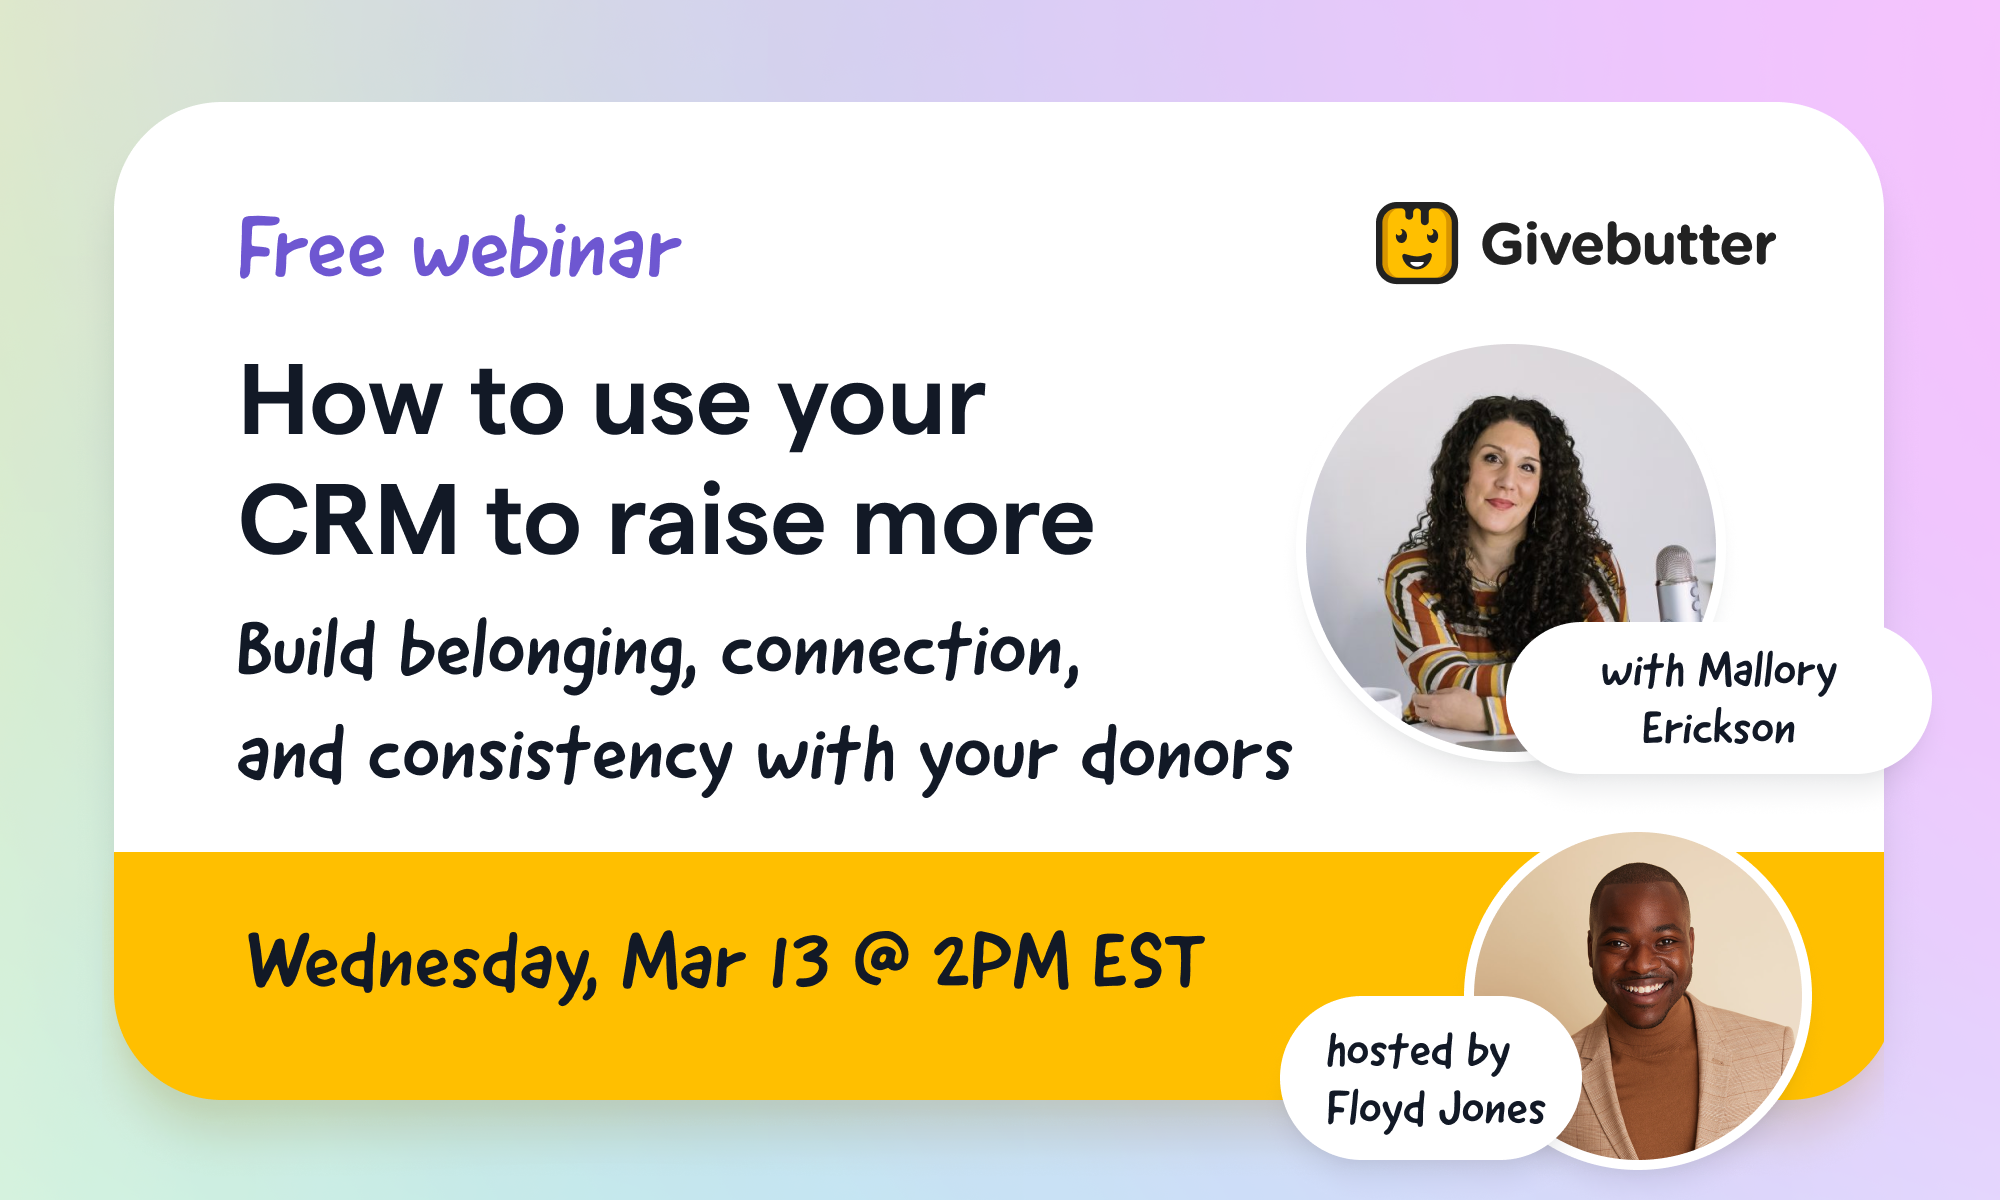 How to use your CRM to raise more: Build belonging, connection, and consistency with your donors